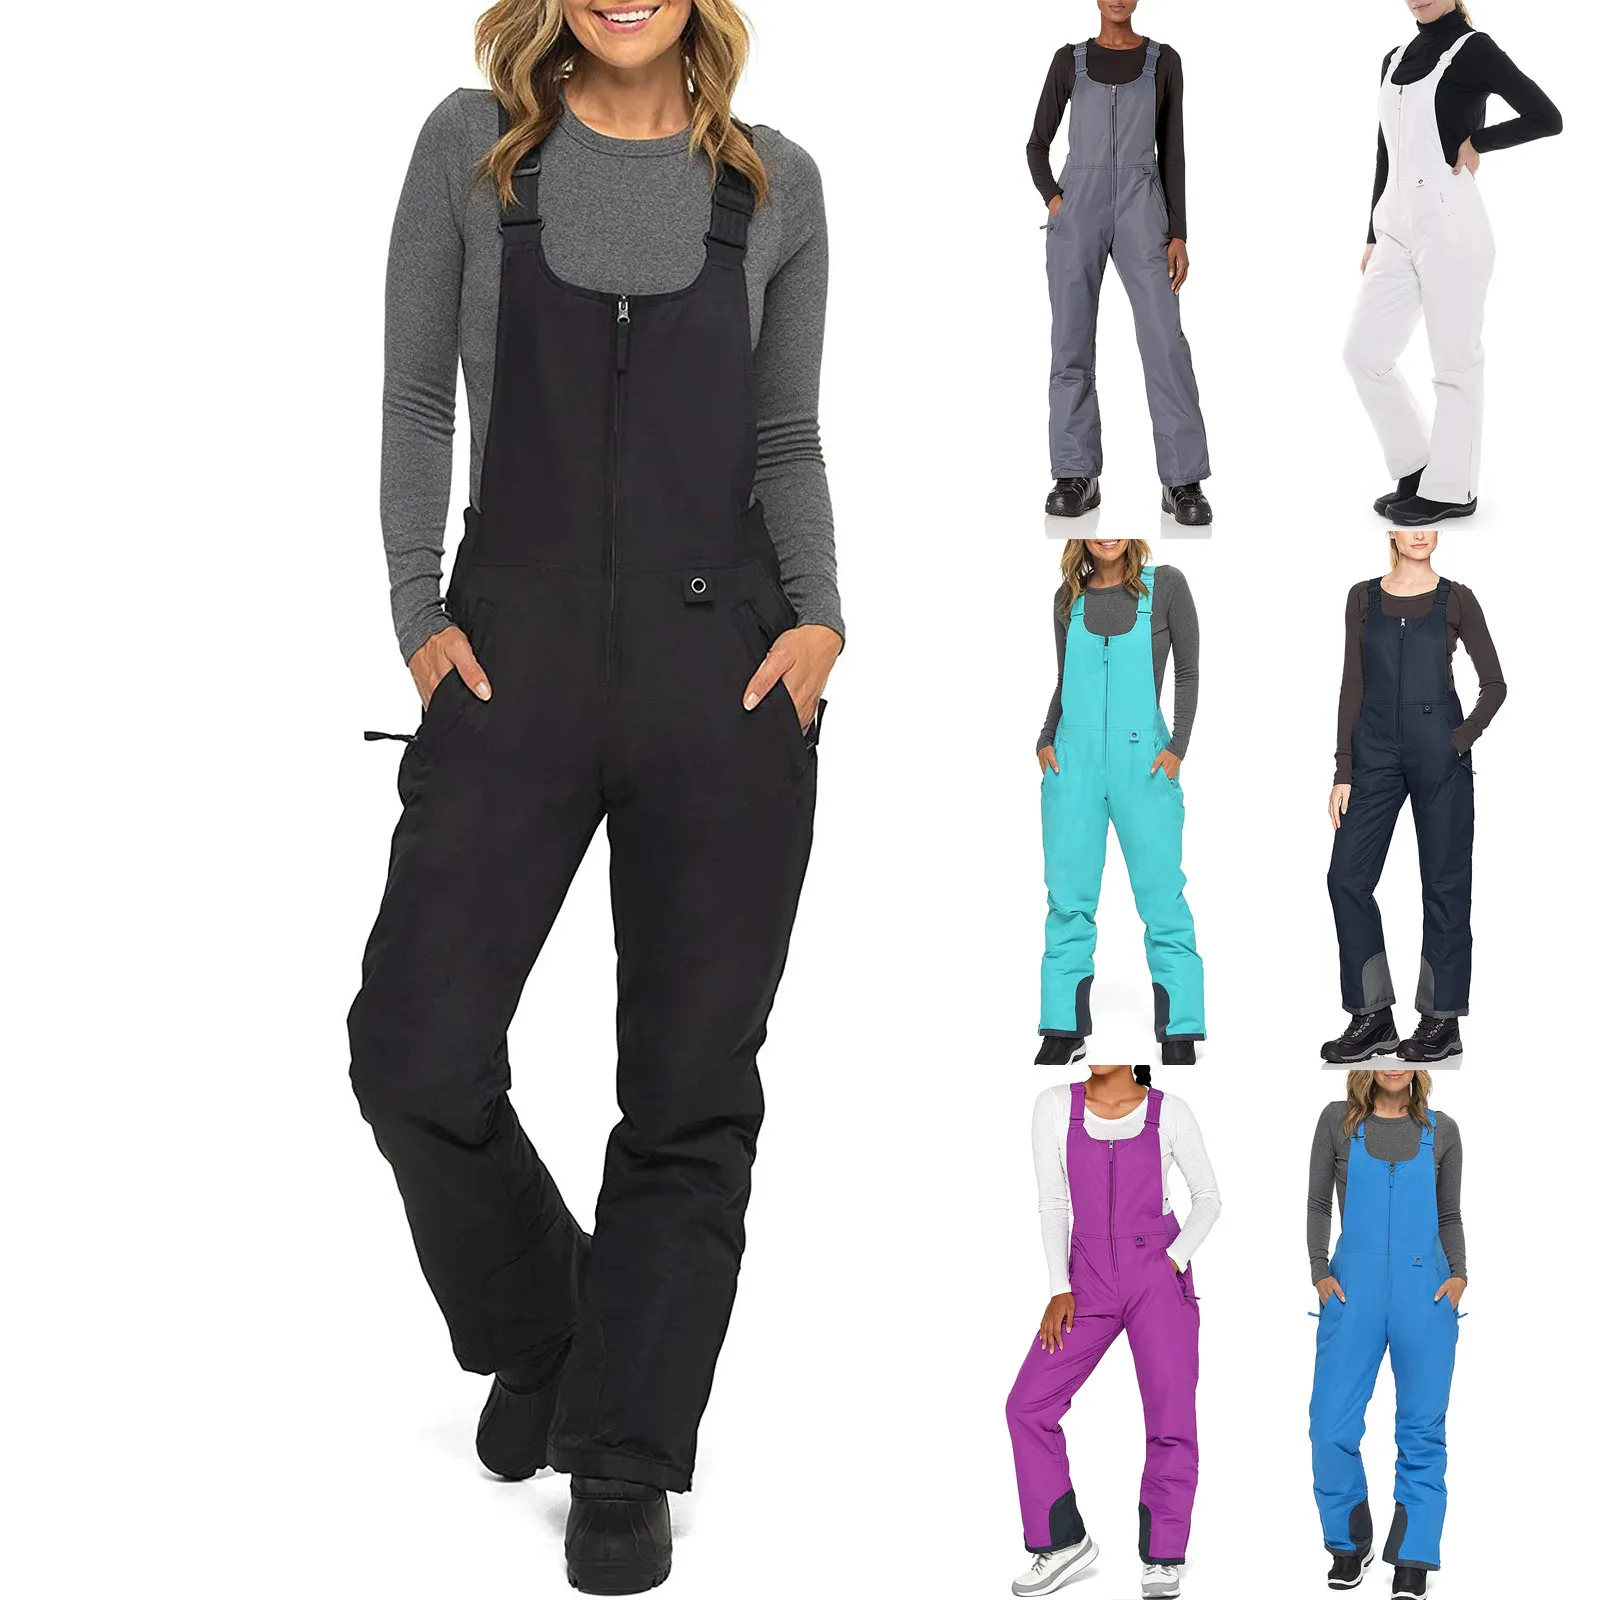 Women's Pants Insulated Bib Overalls Solid Color Pocket One-piece Suspenders Trousers Winter Ski Warm Thick Skiing Pants#L12